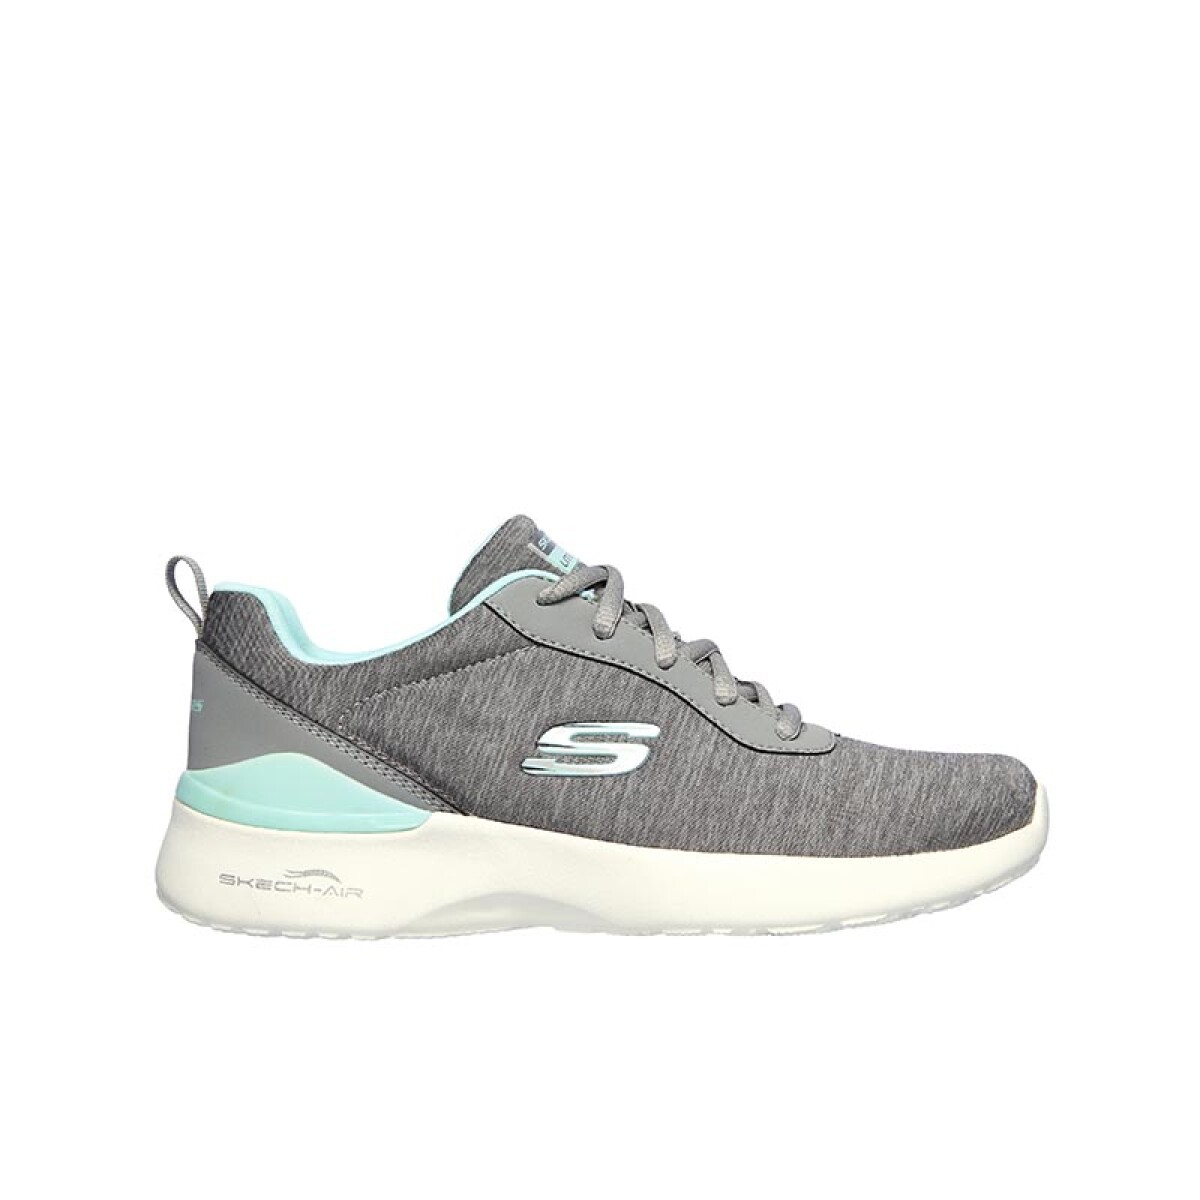 Championes Skech-Air Dynamight - Gris 